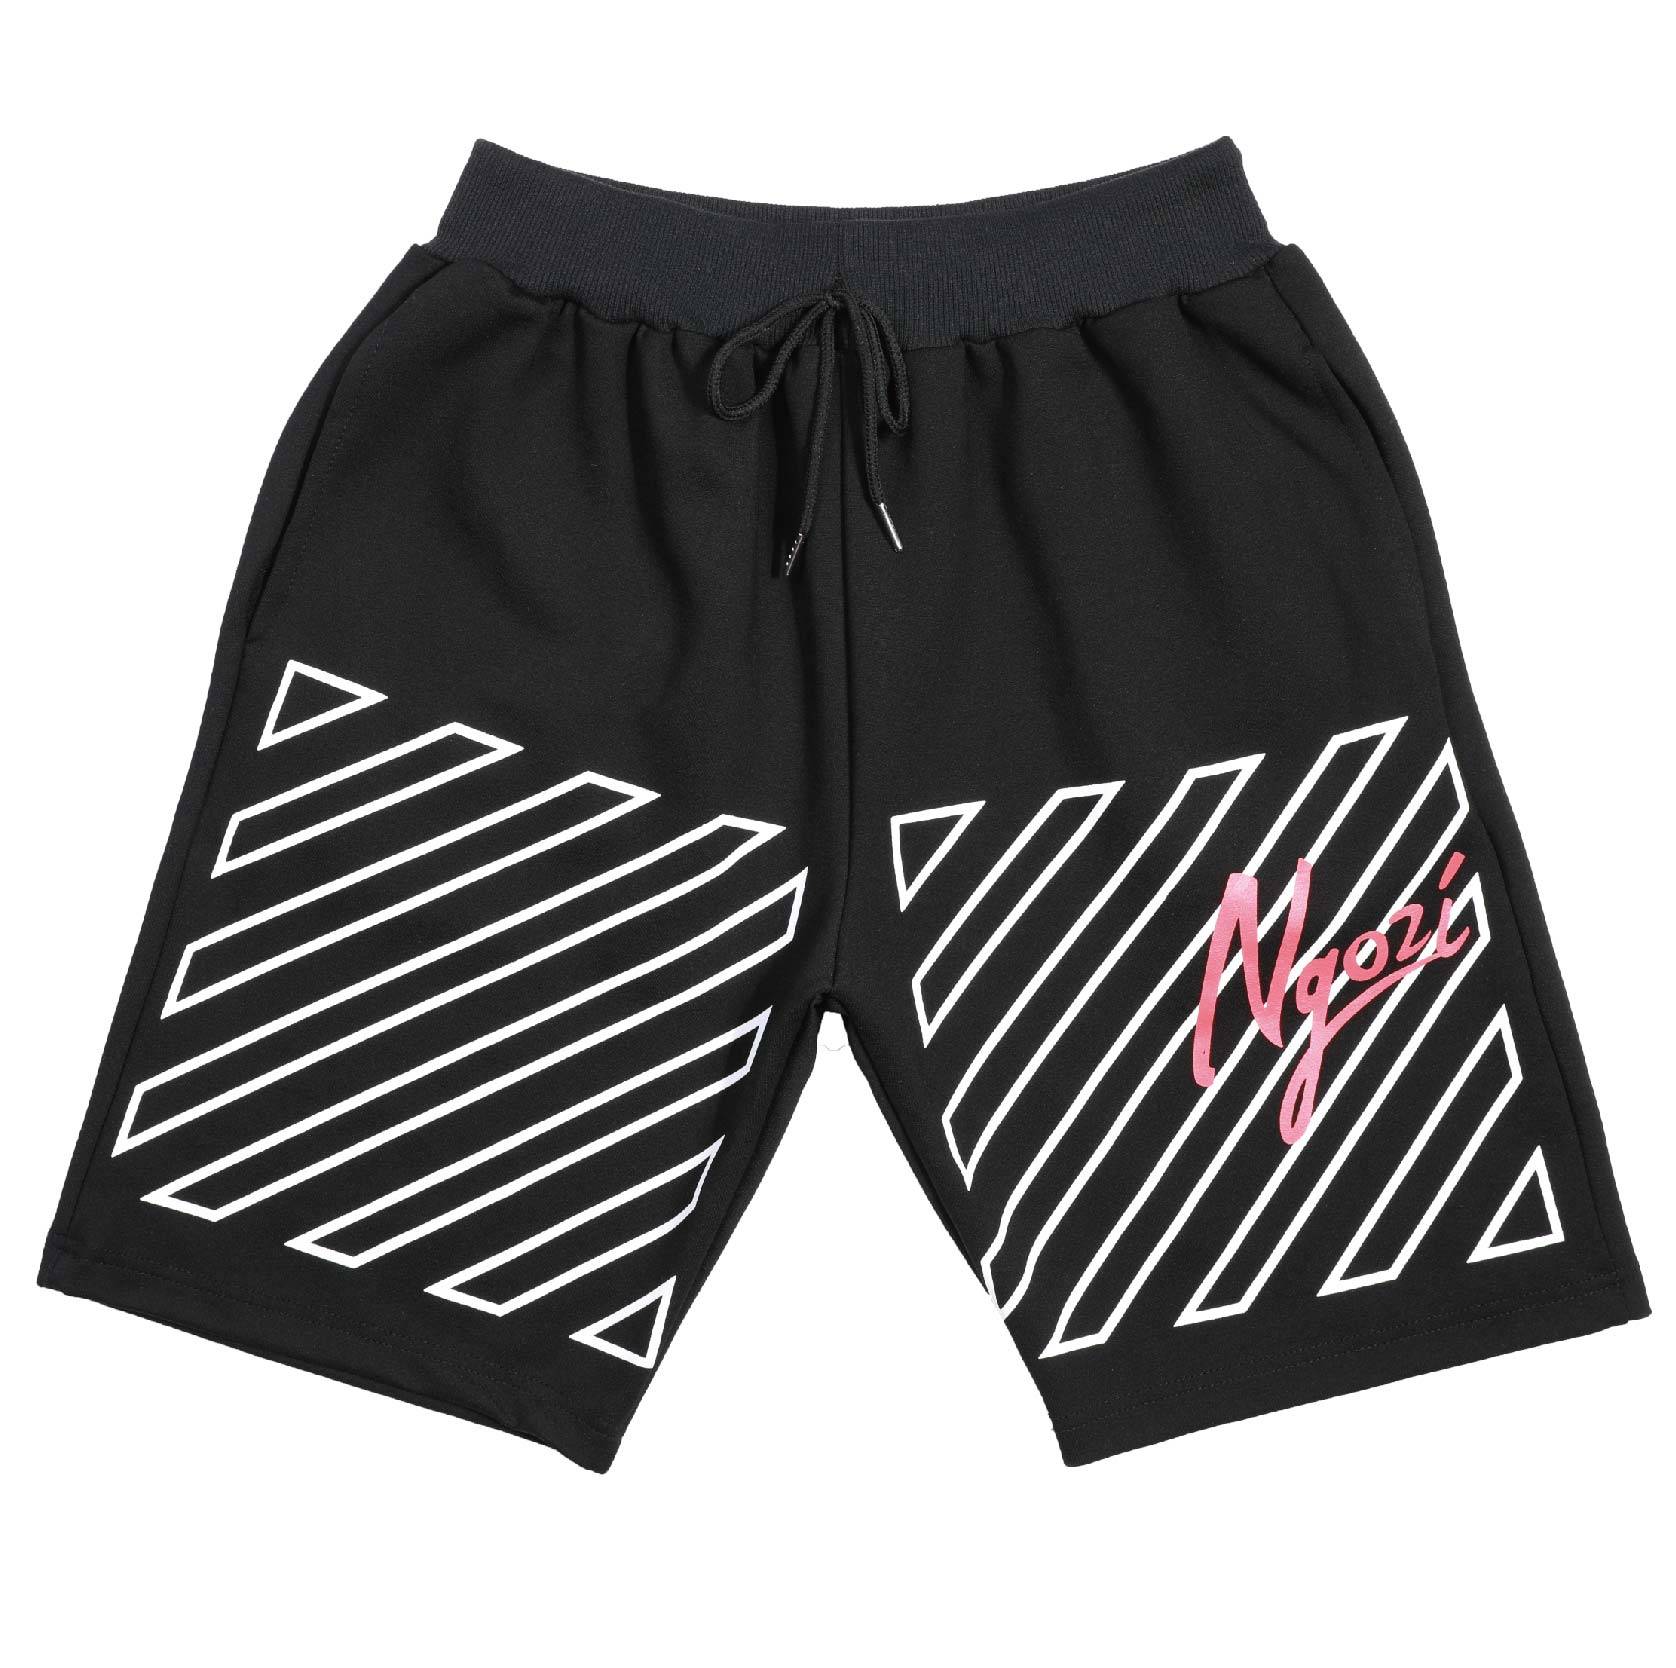 High Quality for Brand T-Shirts - Ngozi Men’s Outdoor Lightweight Quick Dry Hiking Shorts/ Sports Casual Shorts – Fullerton